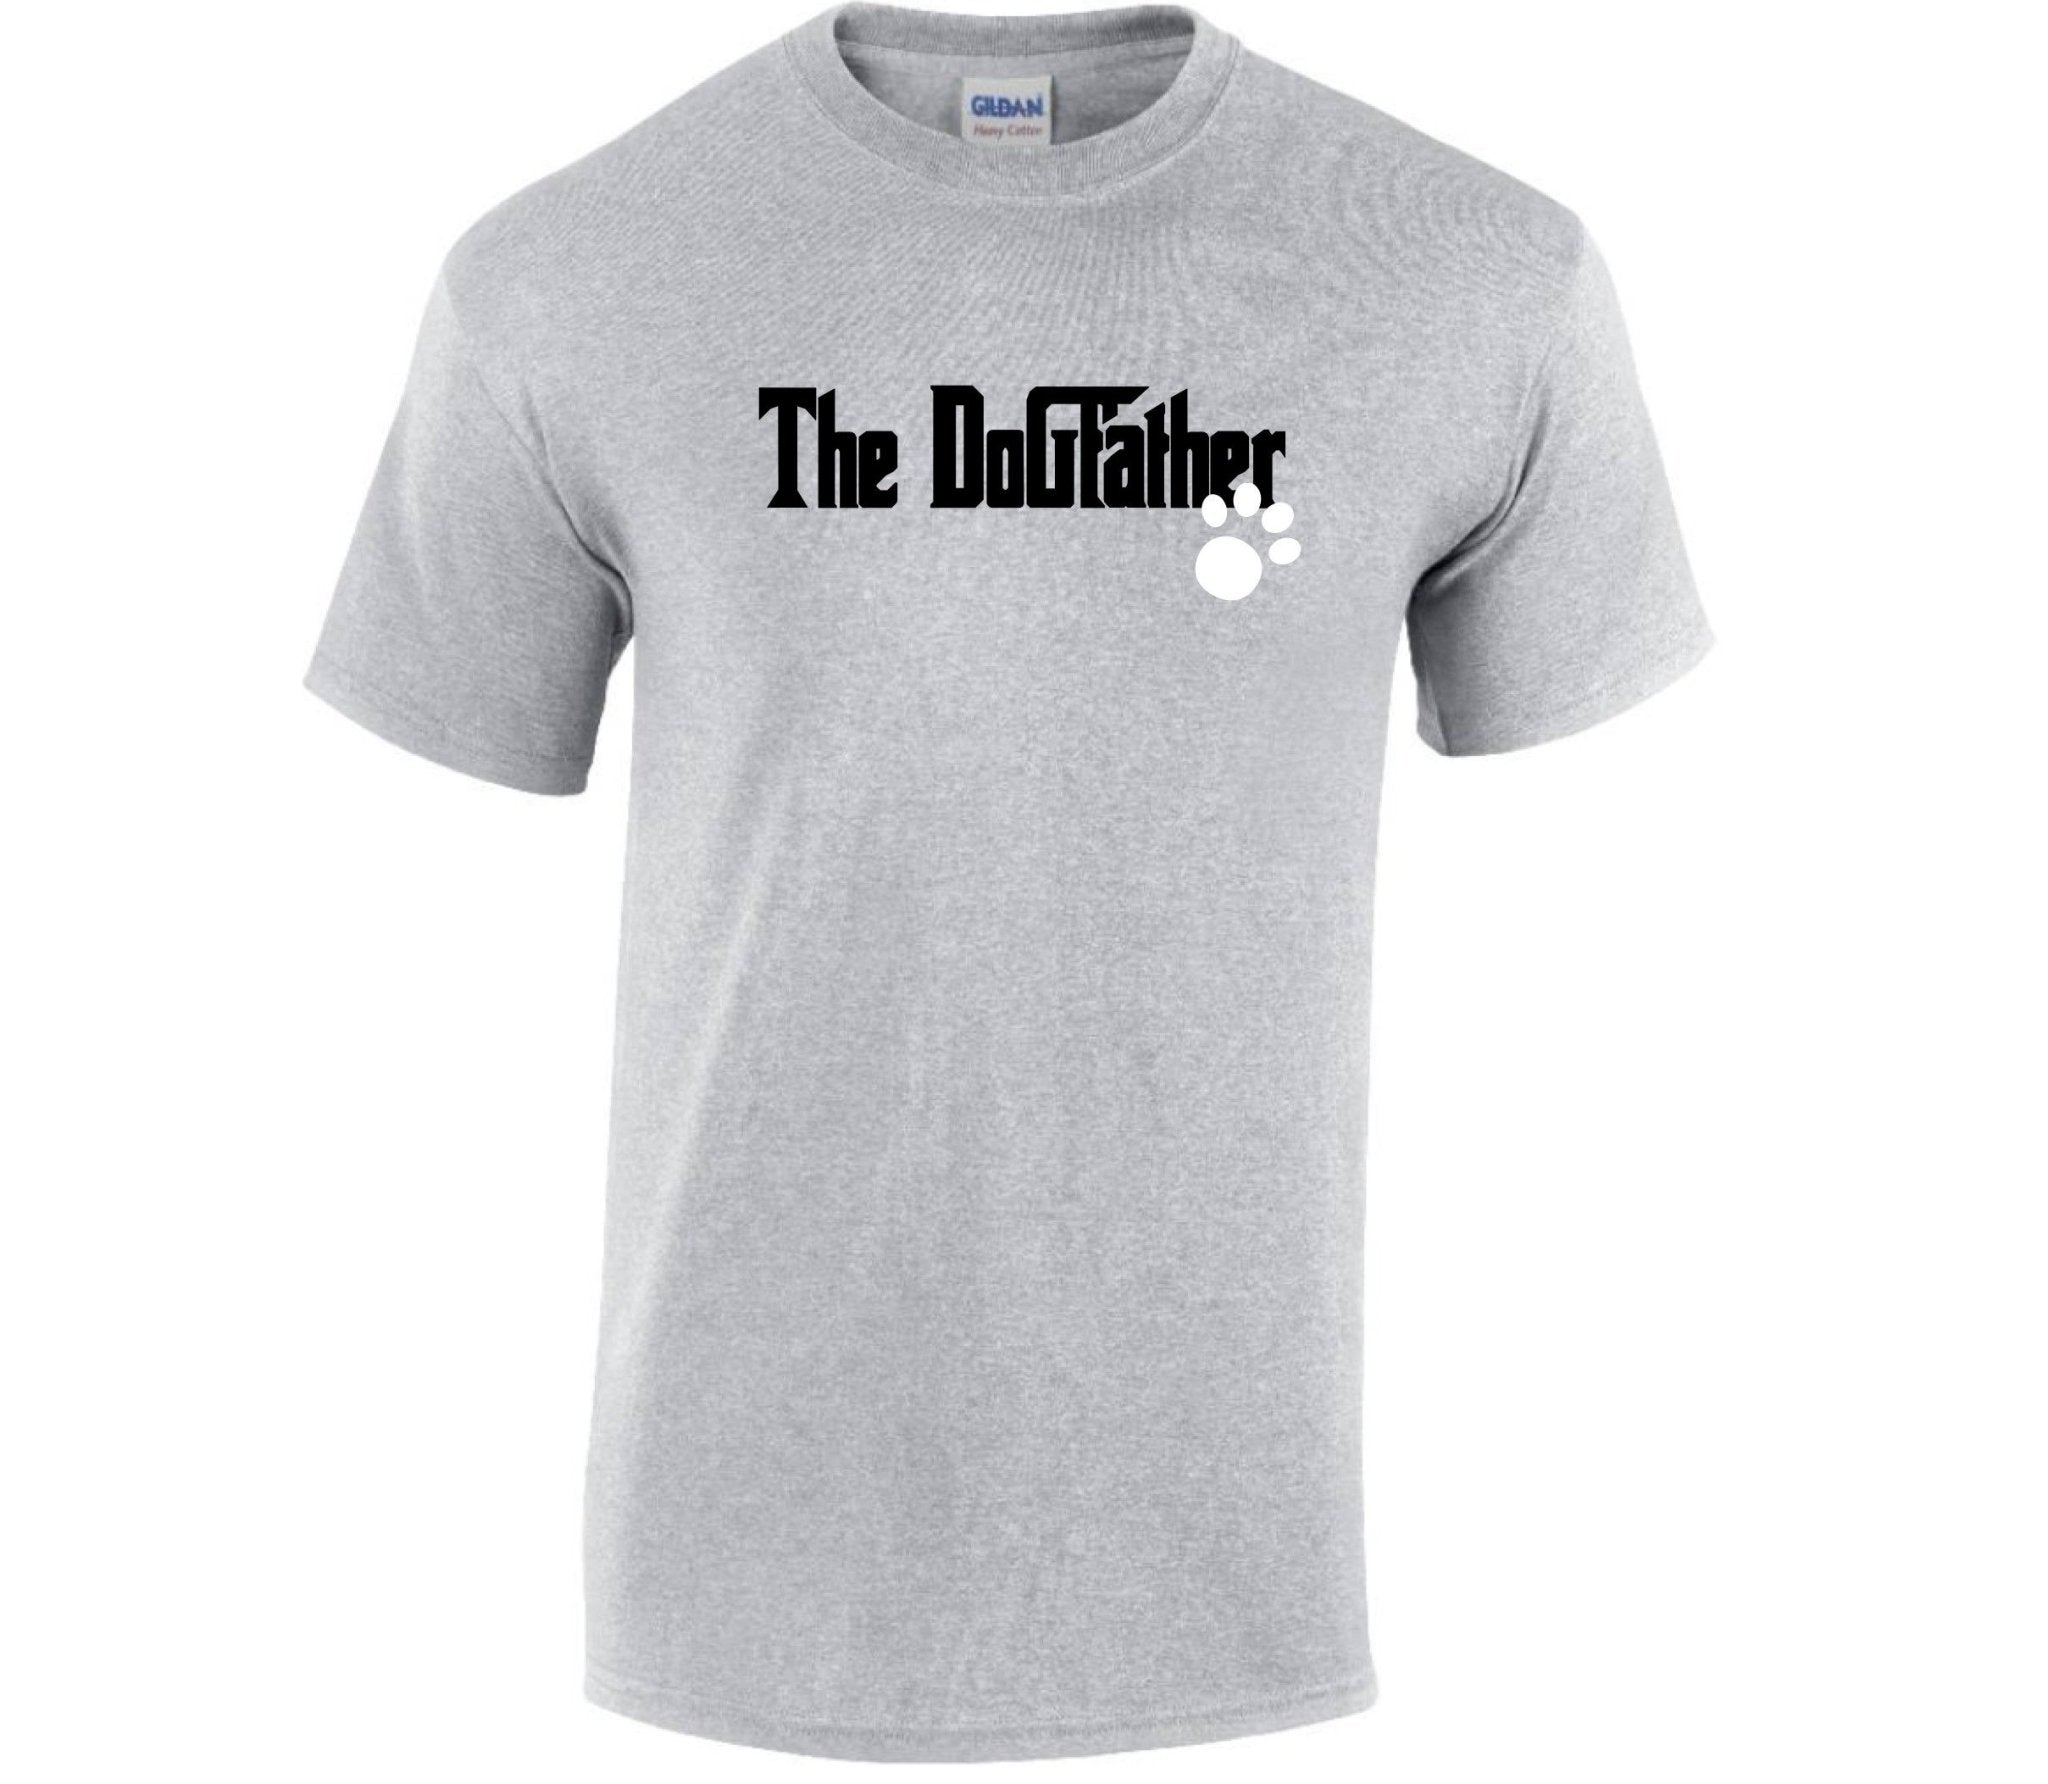 The Dogfather Men's T-Shirt - Pooch-